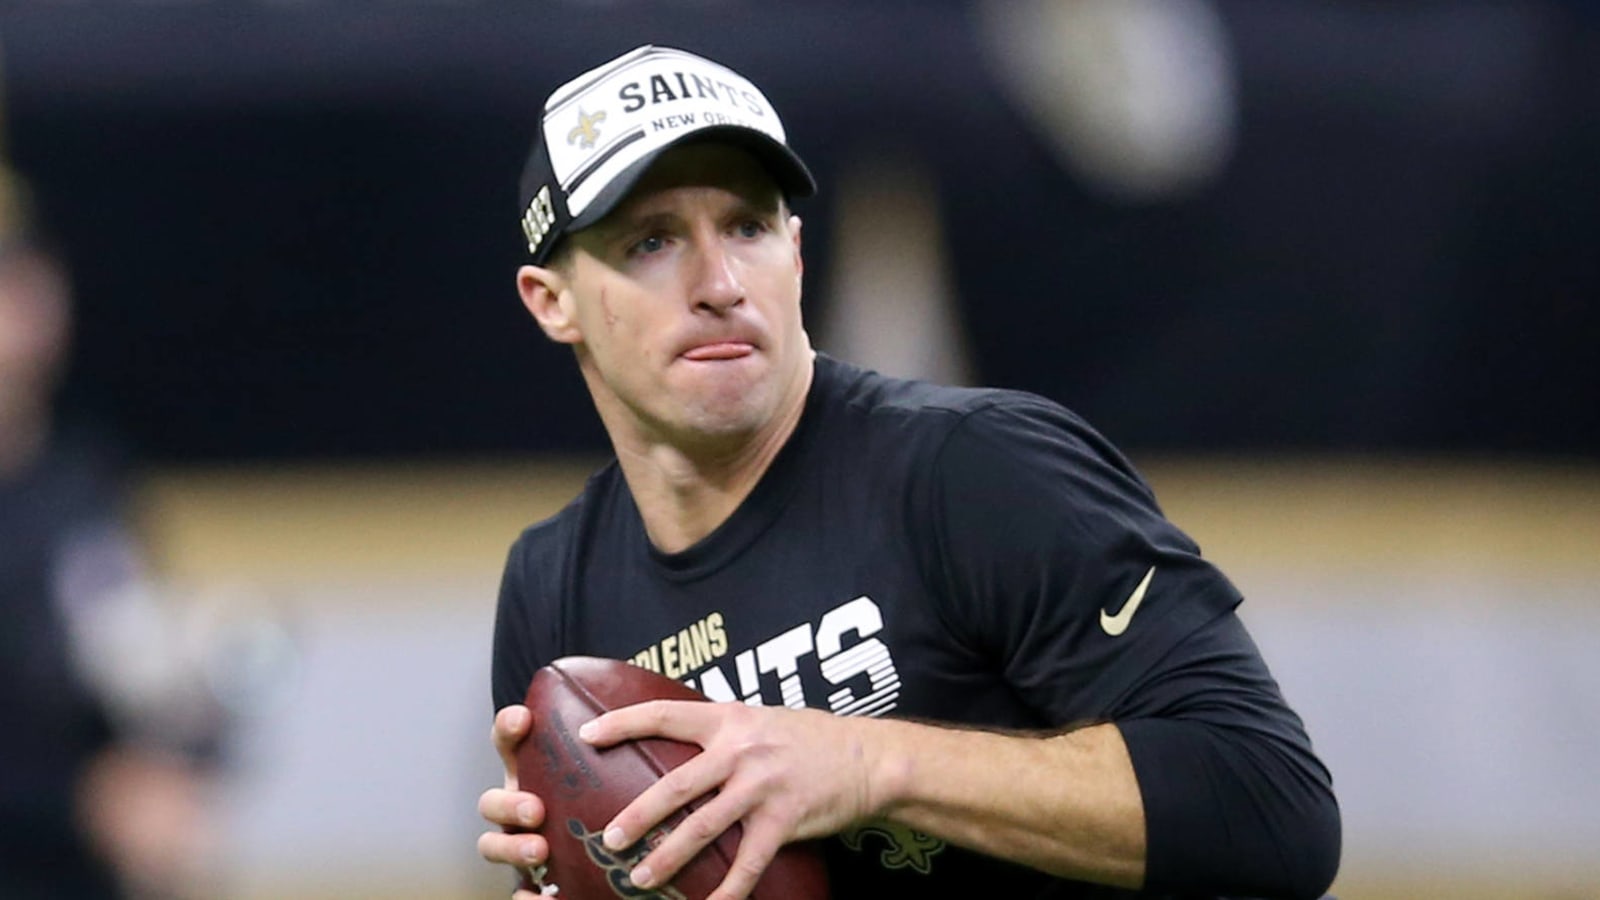 Retired Drew Brees makes about $15M/year from endorsements